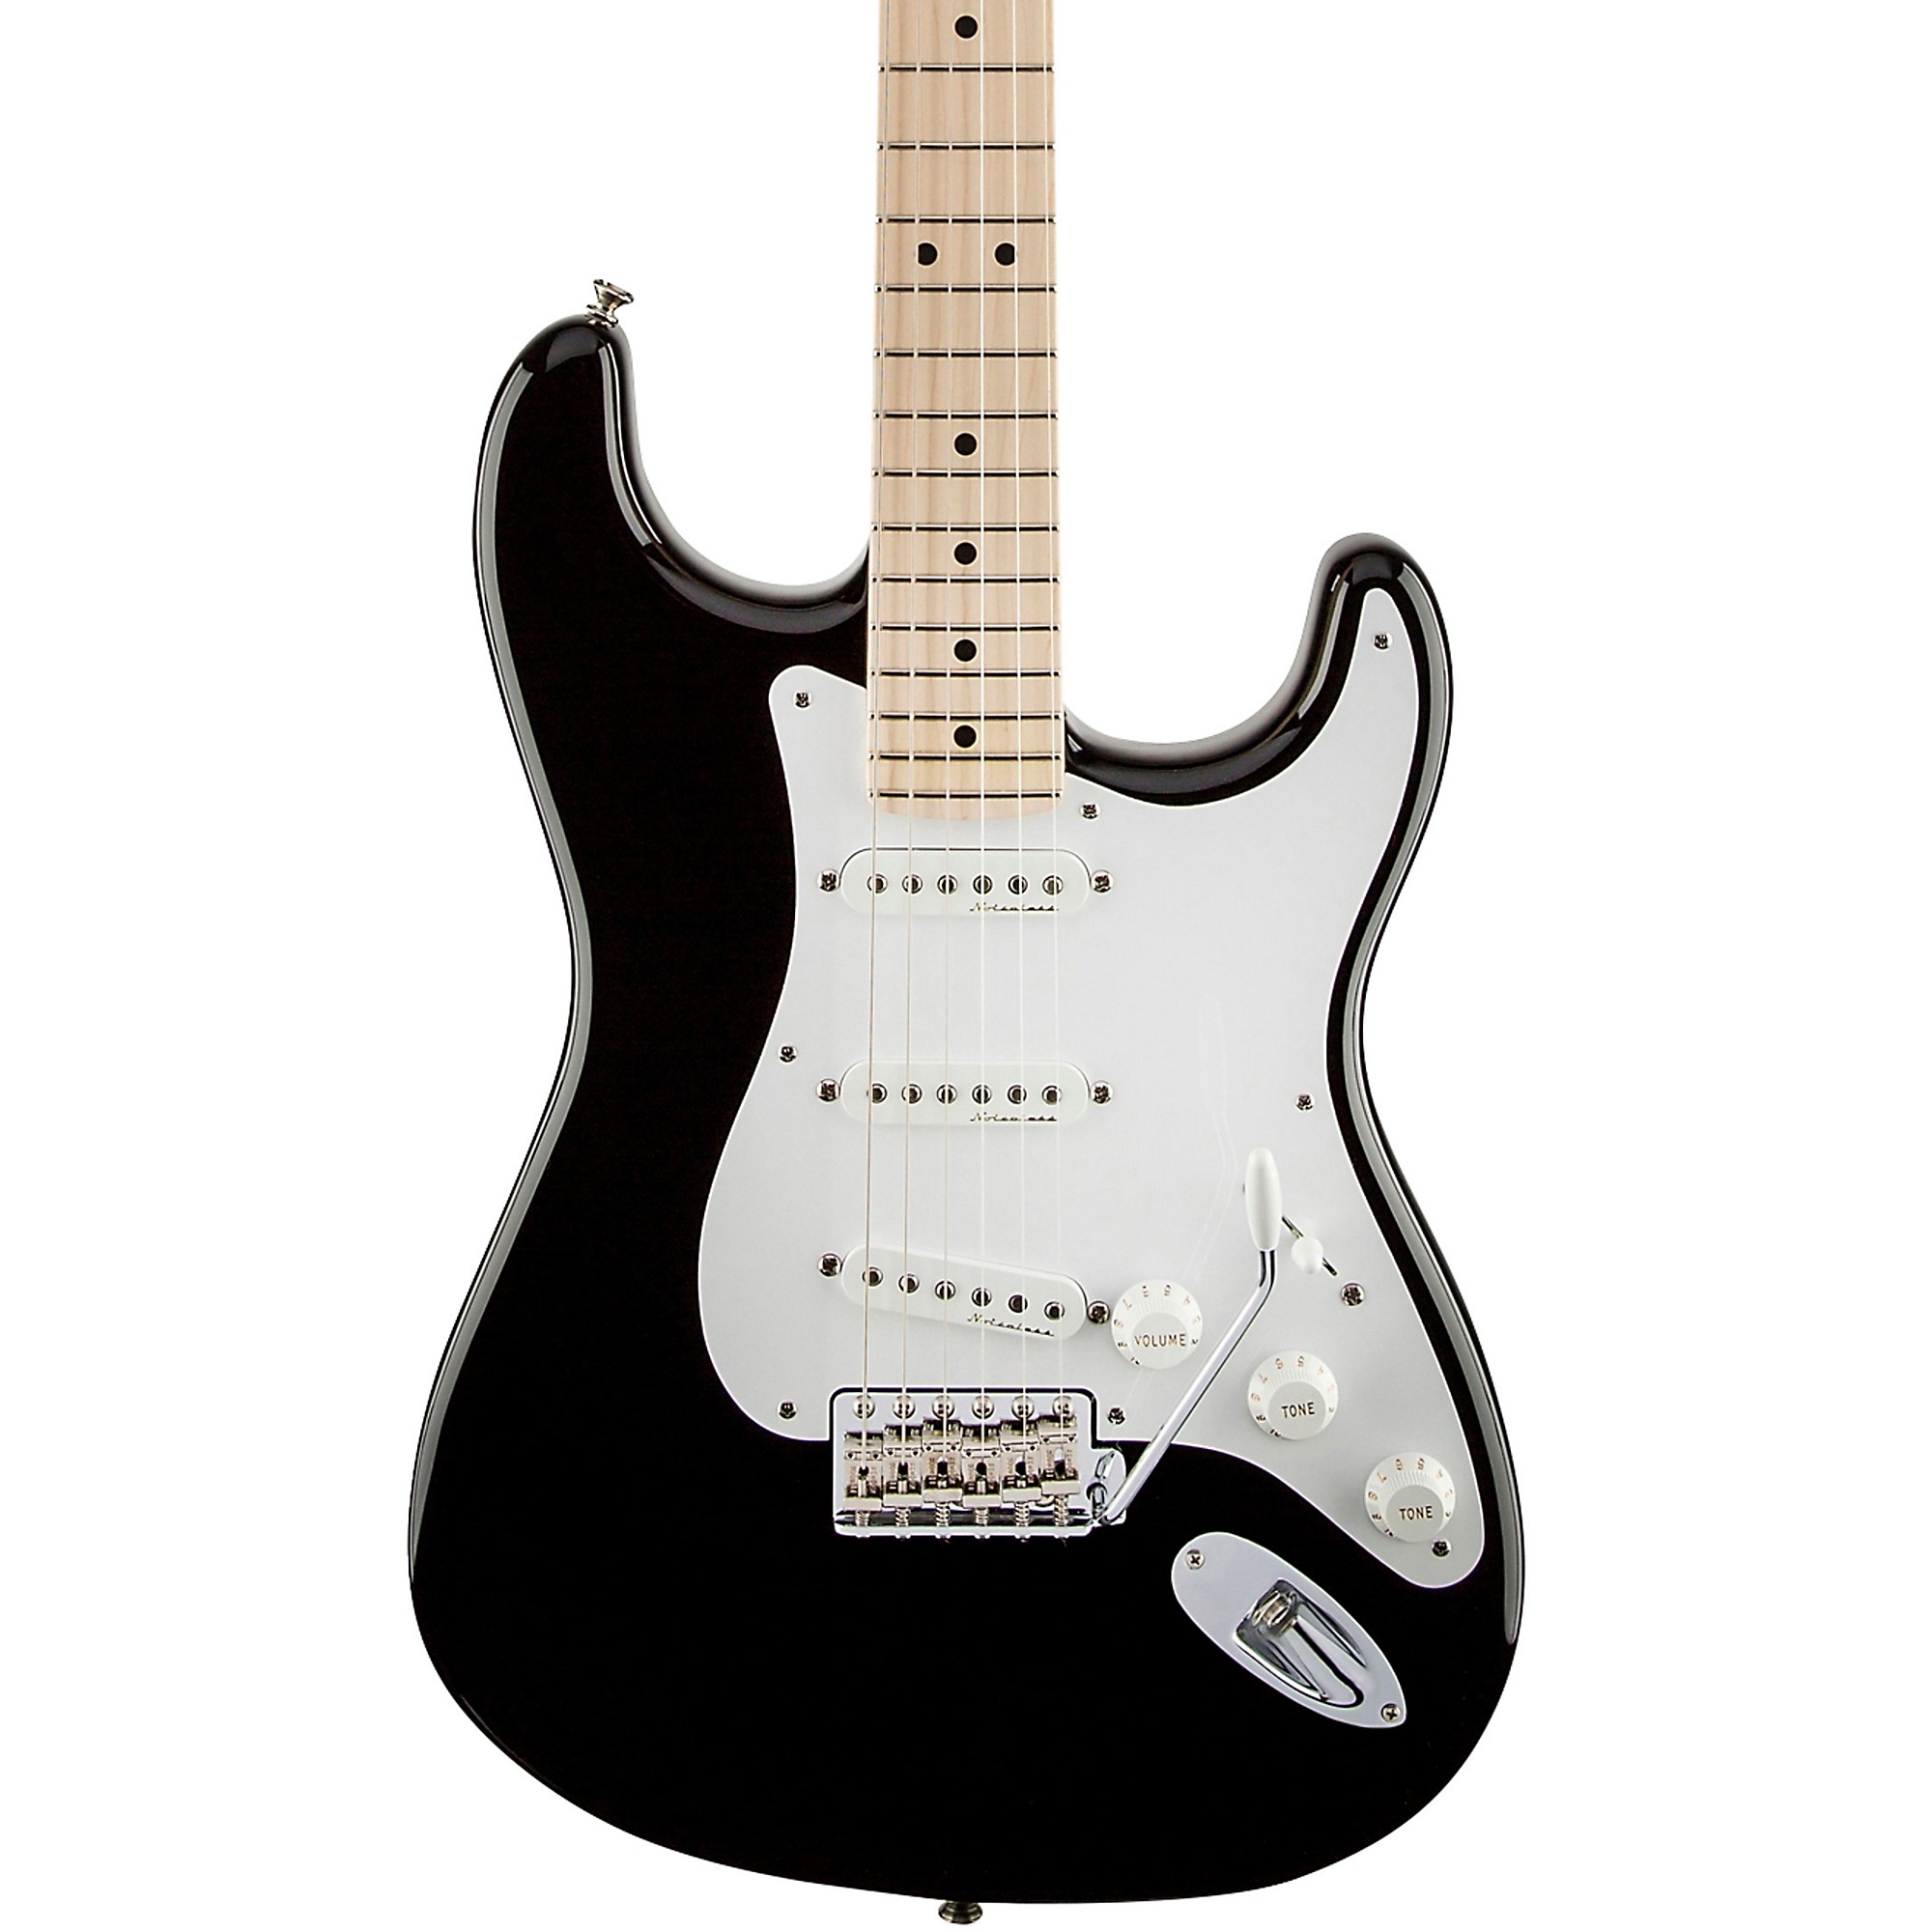 Squier mm stratocaster. Электрогитара Fender Stratocaster. Fender Squier Bullet trem BLK электрогитара. Электрогитара Fender Classic Series '70s Stratocaster. Электрогитара Cort g250 Black.